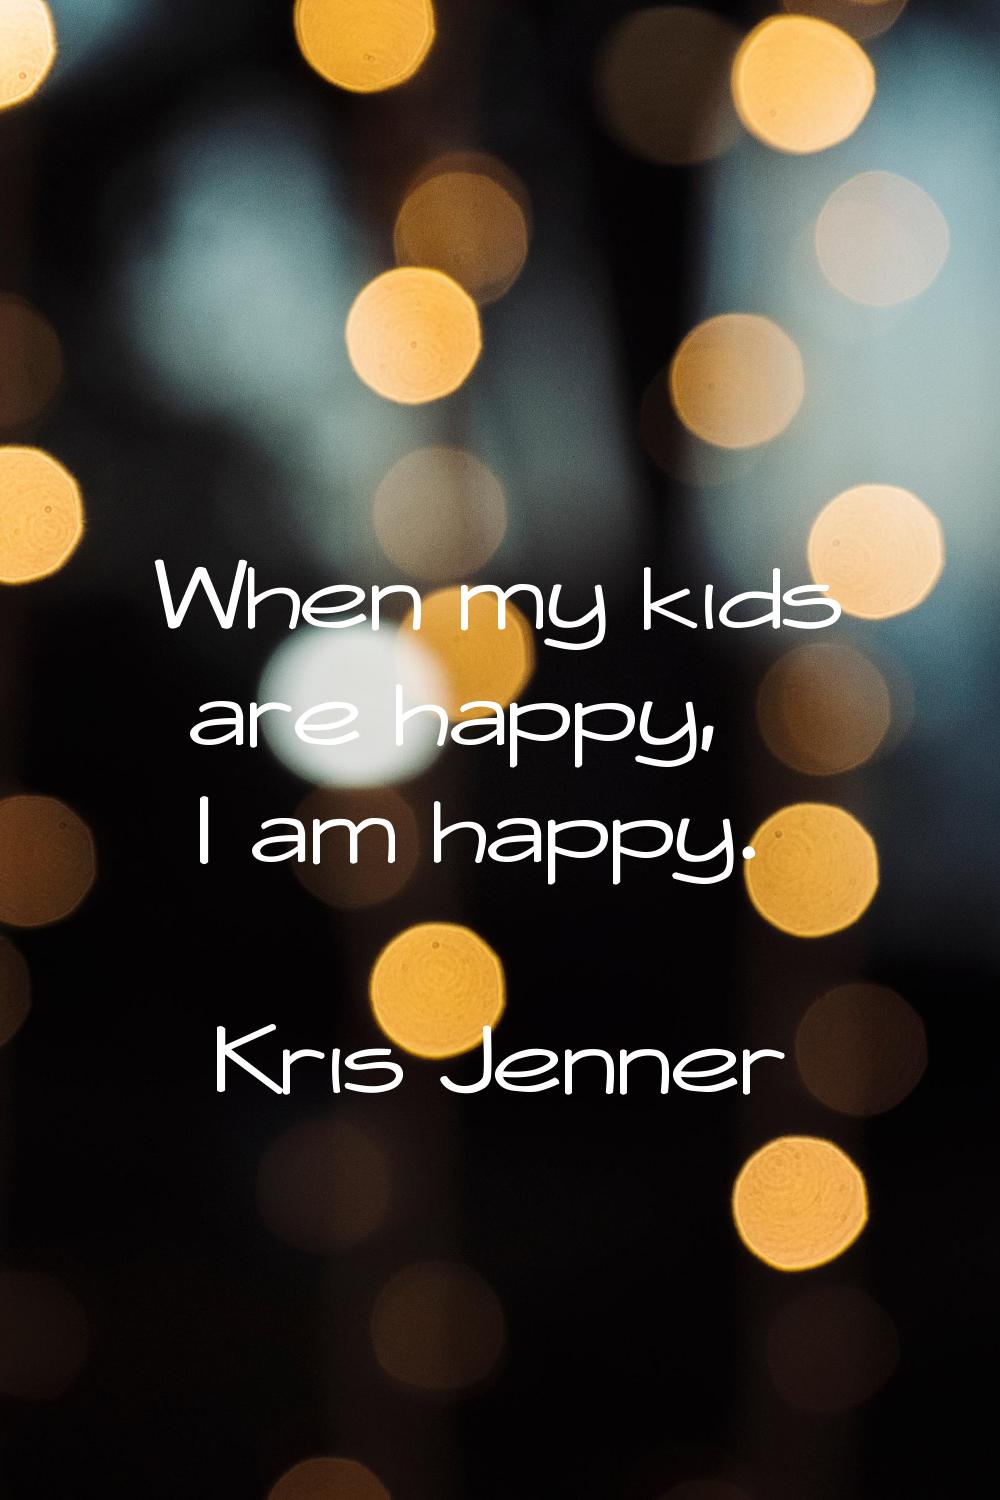 When my kids are happy, I am happy.